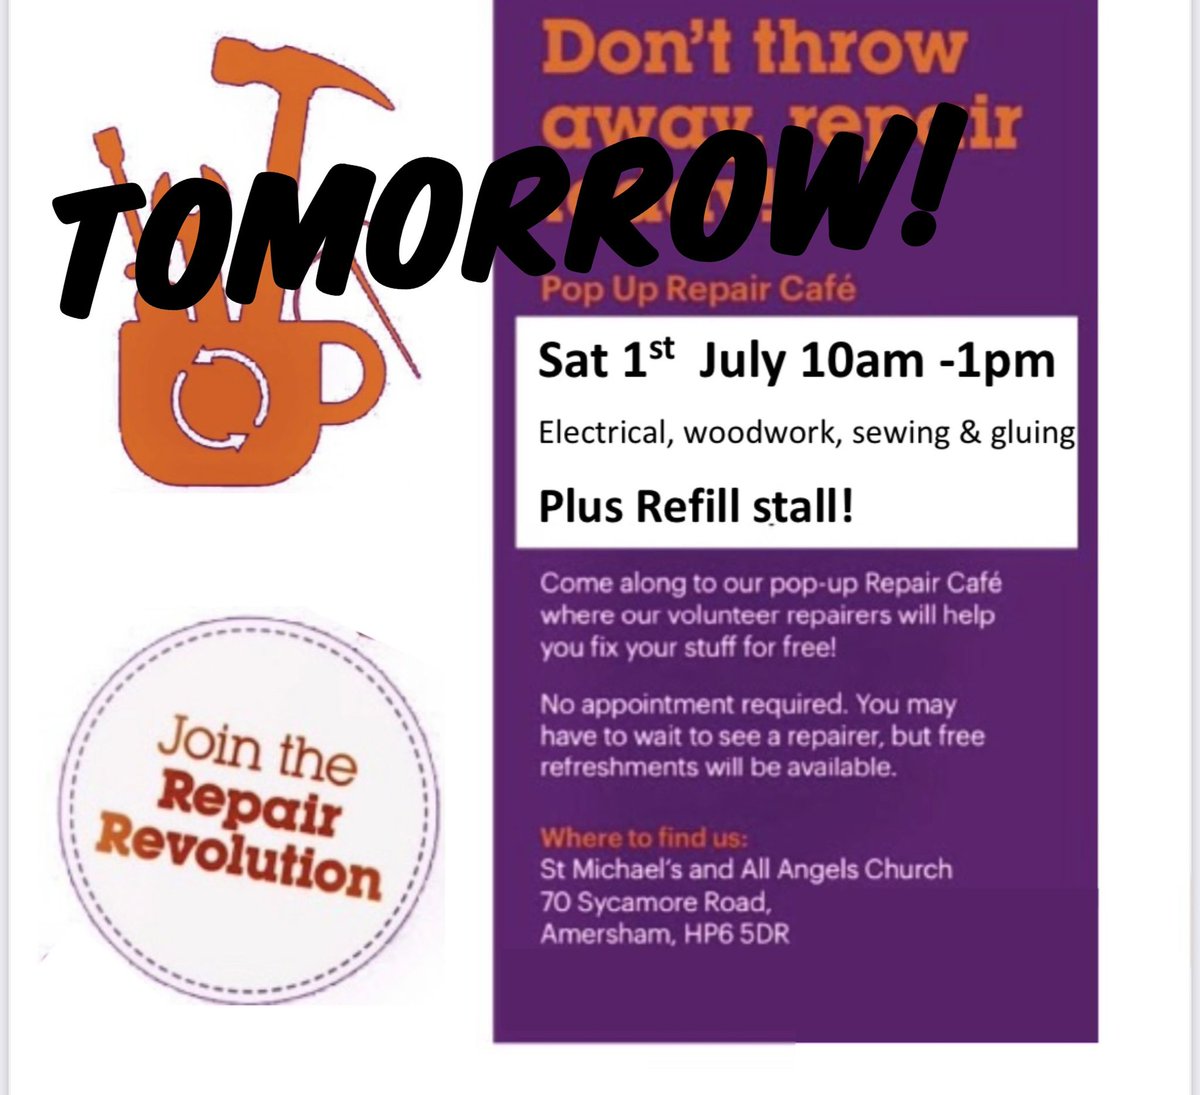 Calling #Amersham & #Chesham residents! Don't forget to bring your broken things to our #Repair Cafe tomorrow. We're on a mission to keep things out of landfill. Join us!

#community #sustainability #repairrevolution